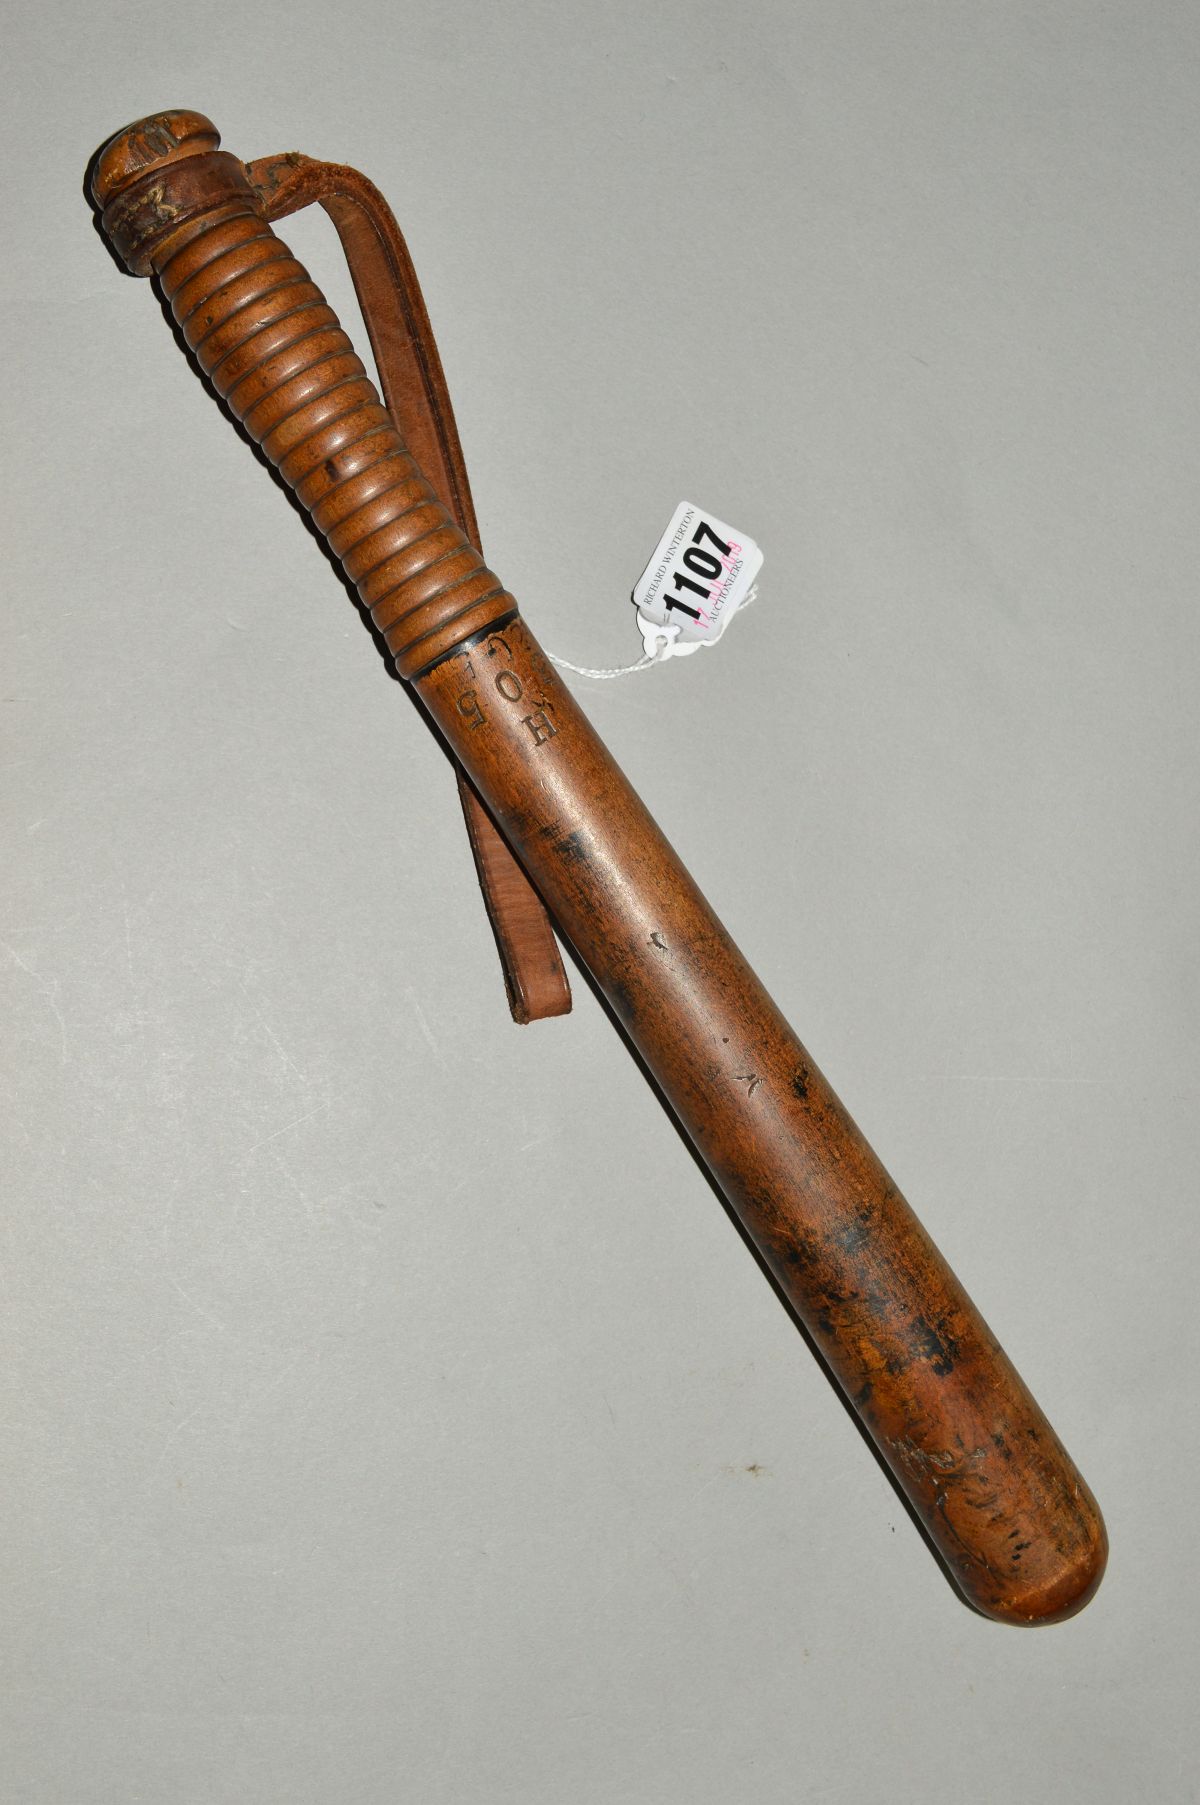 A MILITARY TRUNCHEON with leather wrist strap, broad arrow stamped into the shaft, approximate